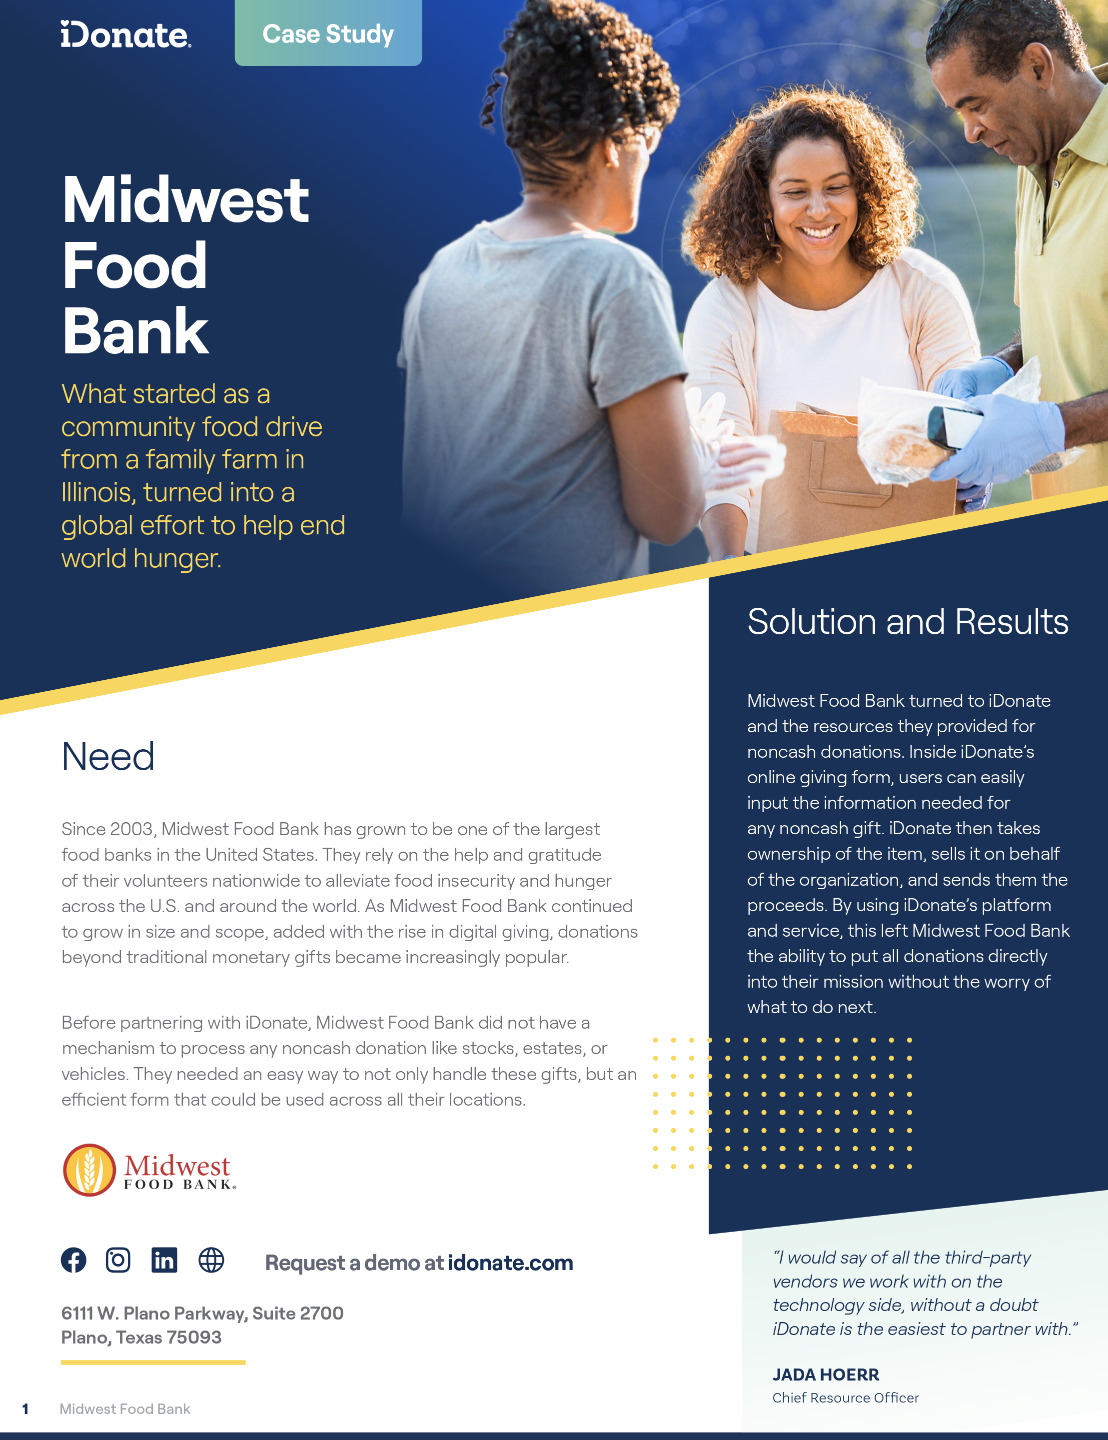 Midwest Food Bank Case Study Image